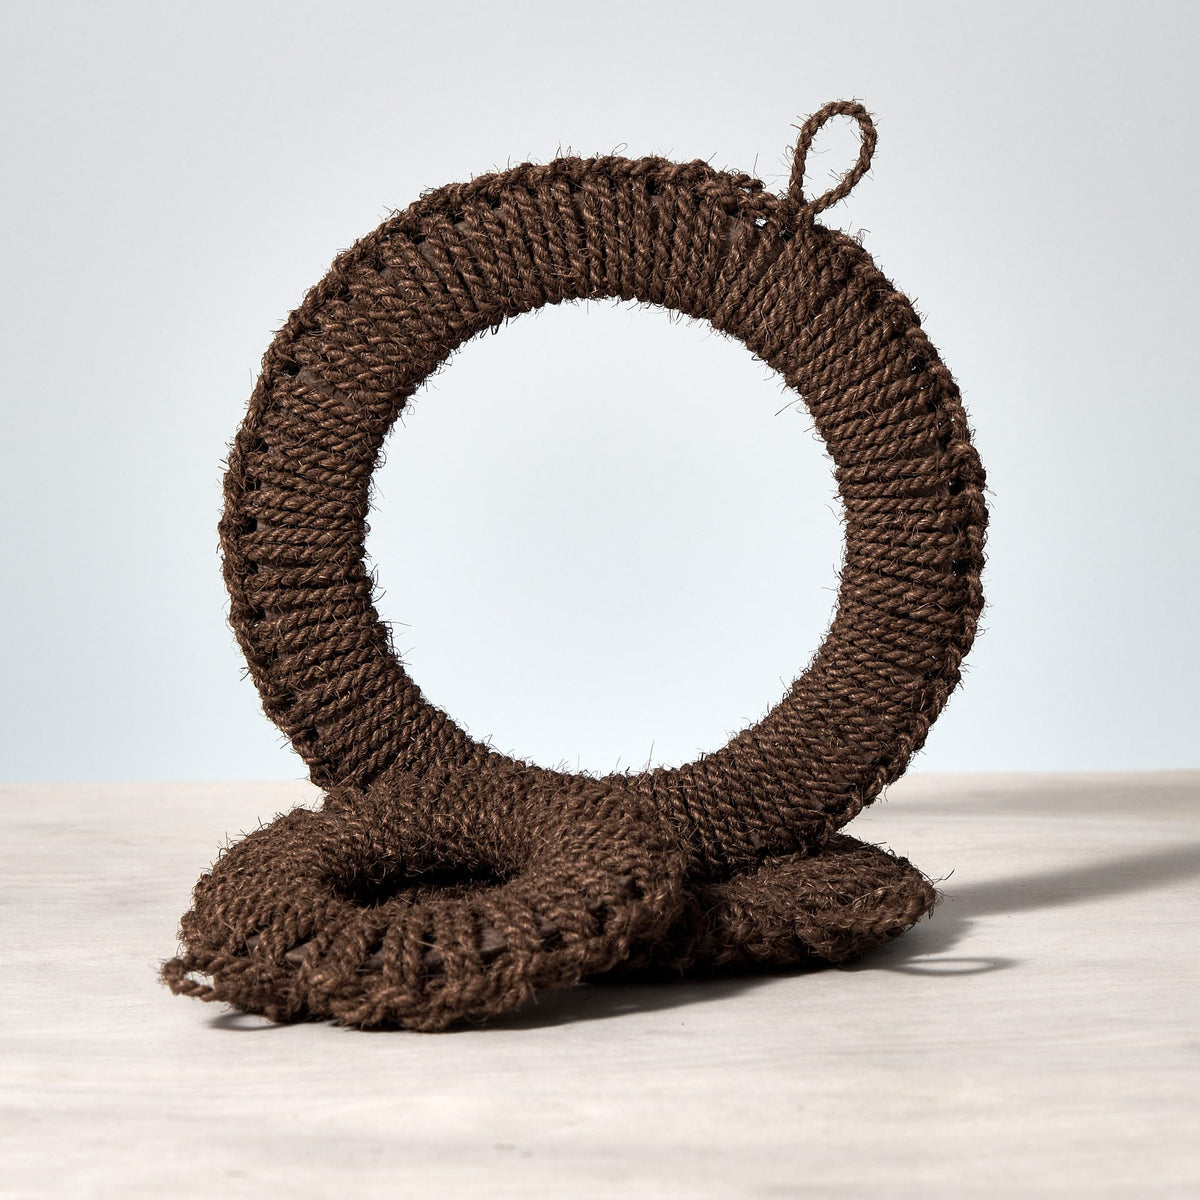 A Hand-Knit Trivet – Large by Takada on top of a wooden table.